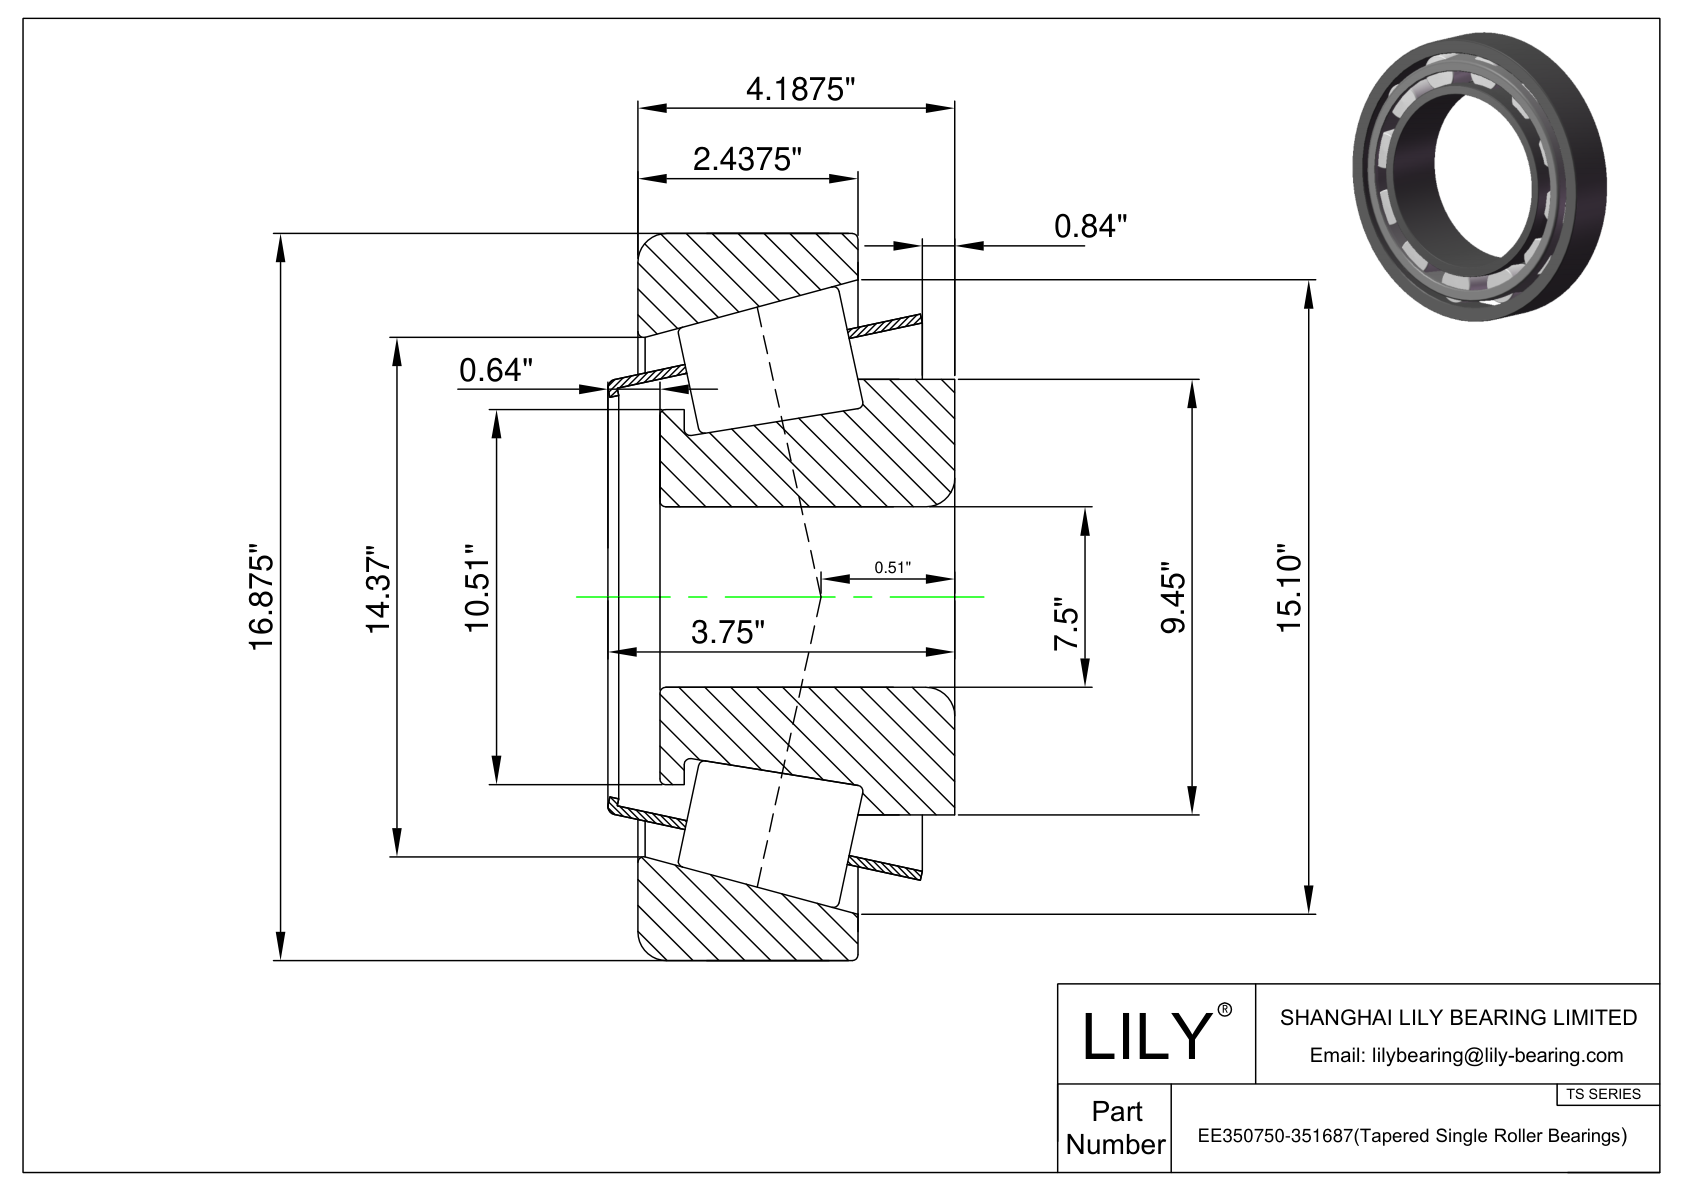 EE350750-351687 TS (Tapered Single Roller Bearings) (Imperial) cad drawing